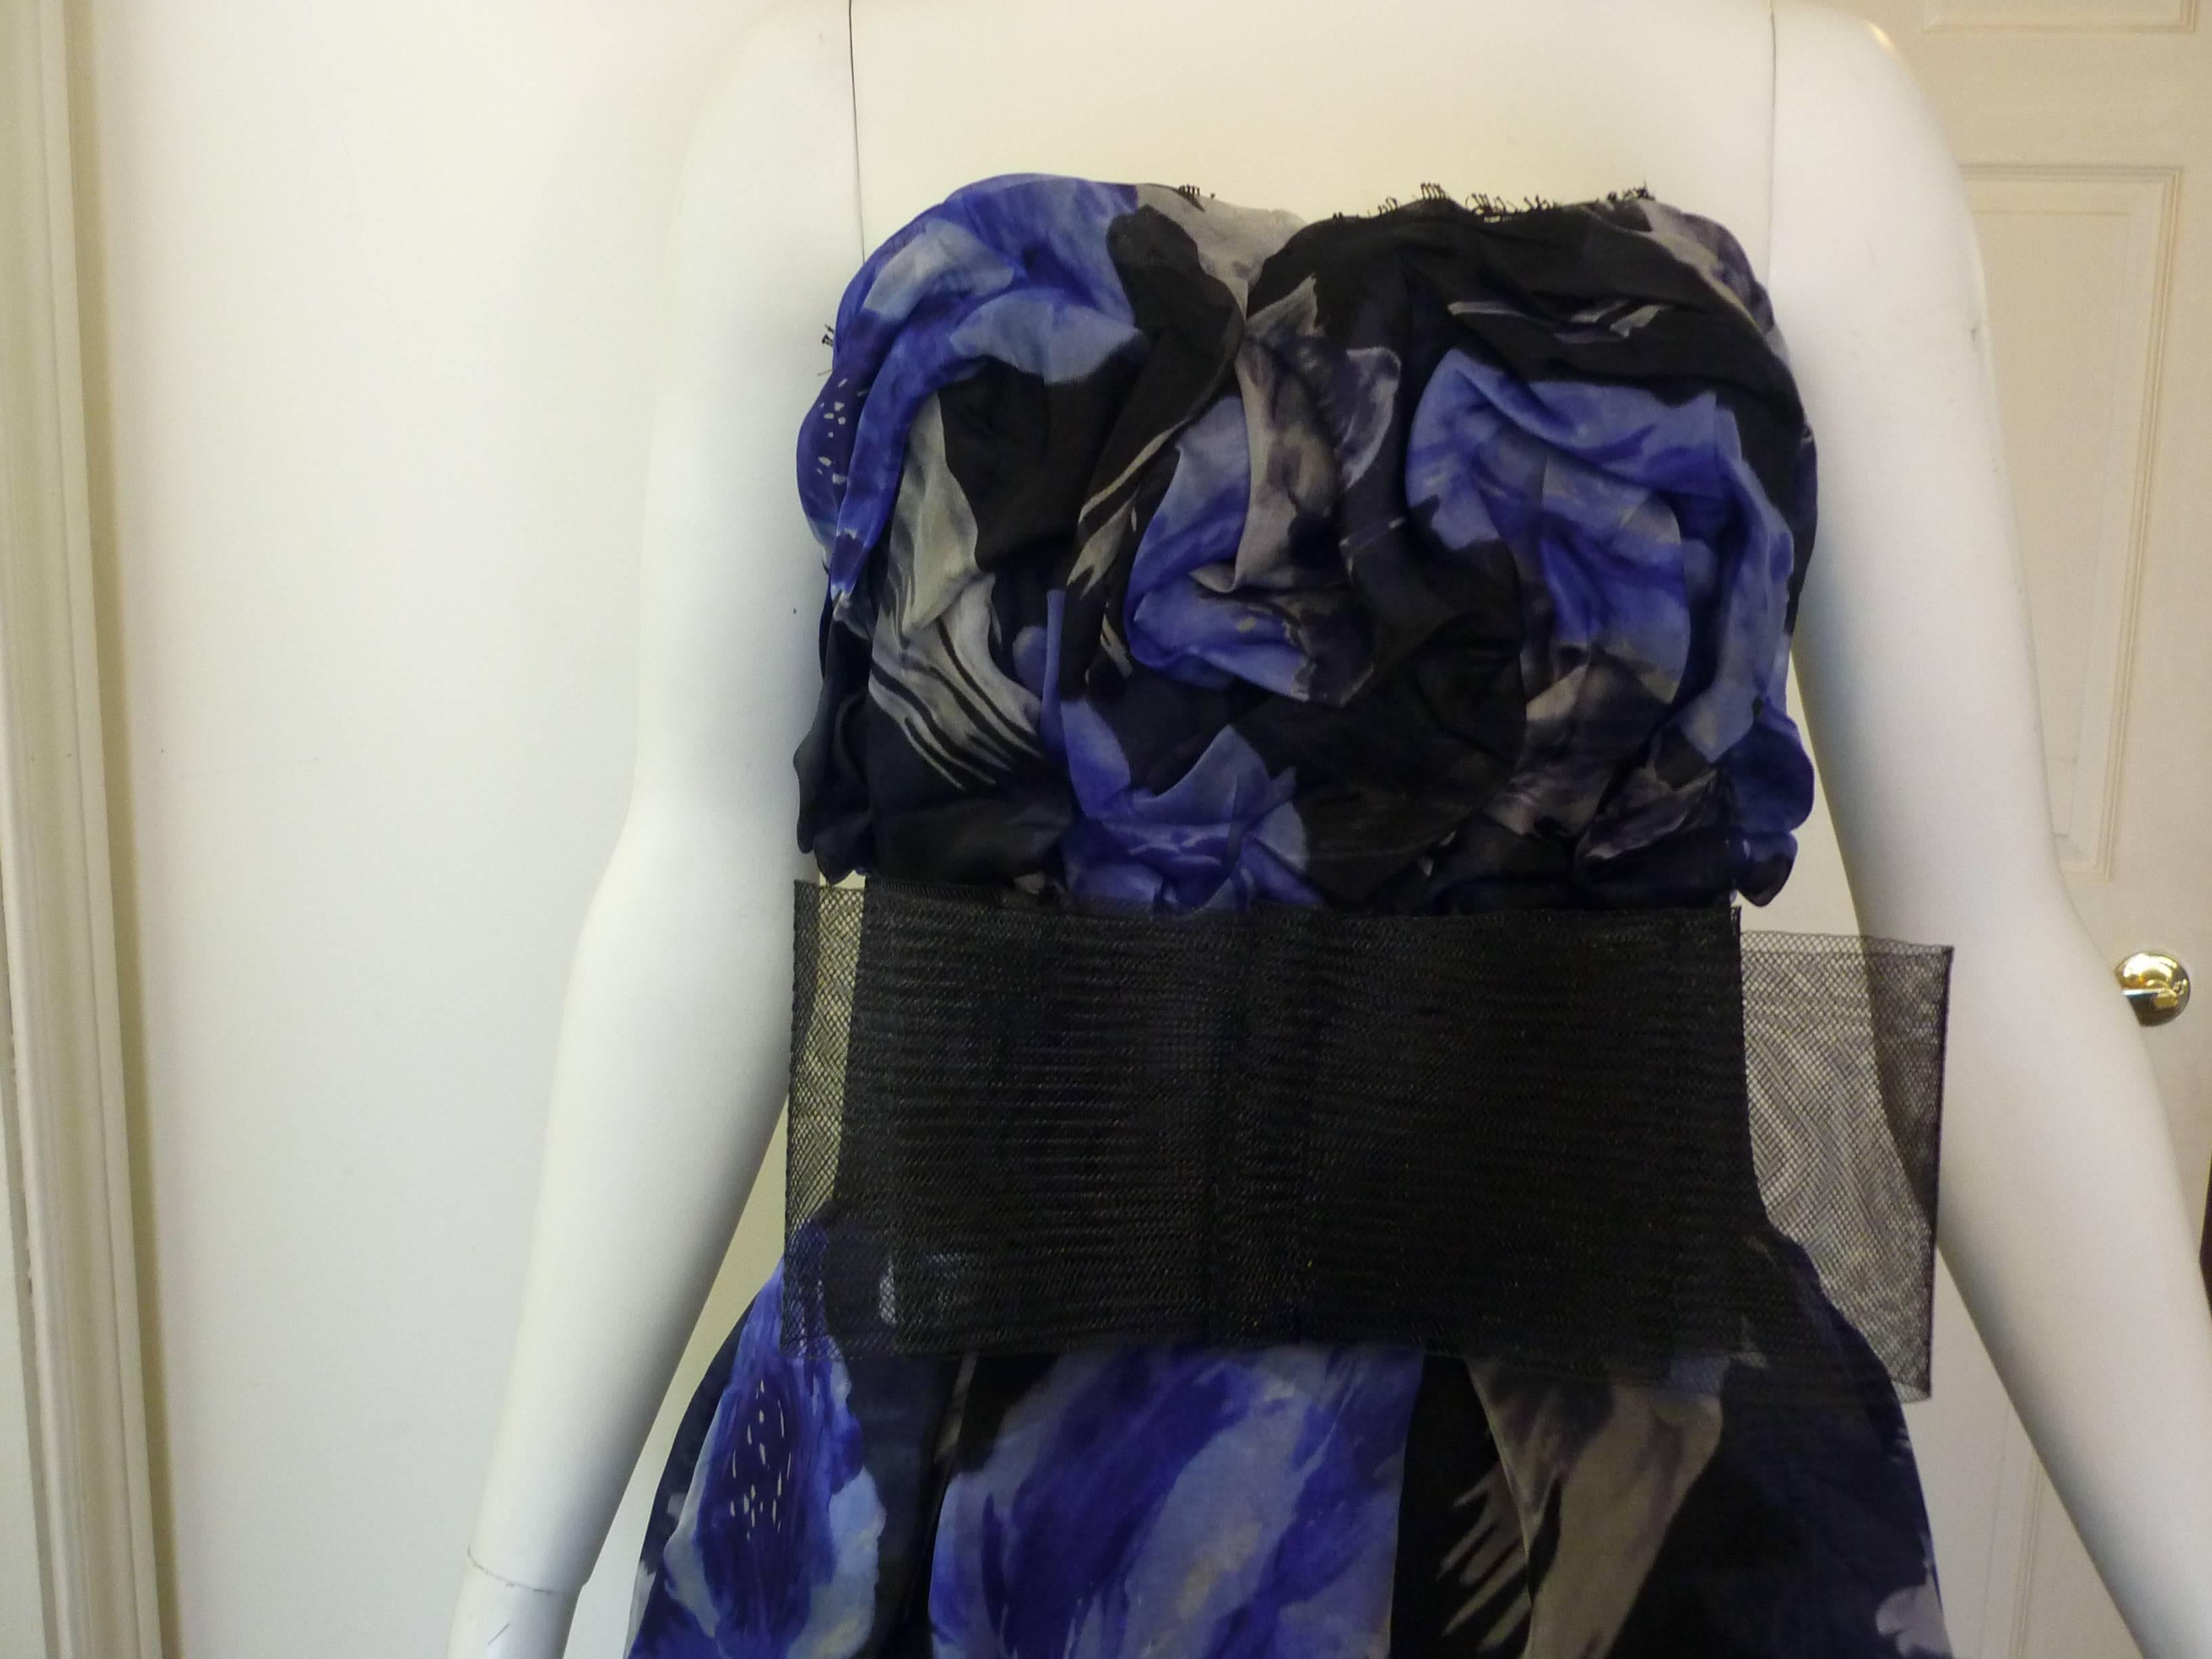 Blue, black and white Marchesa Notte silk floral print, this dress is strapless with a sweatheart neck,  and has boning at the bodice. There is also a mesh bow at the waist, and lace trim at the top and bottom. Closure is by way of a back invisible